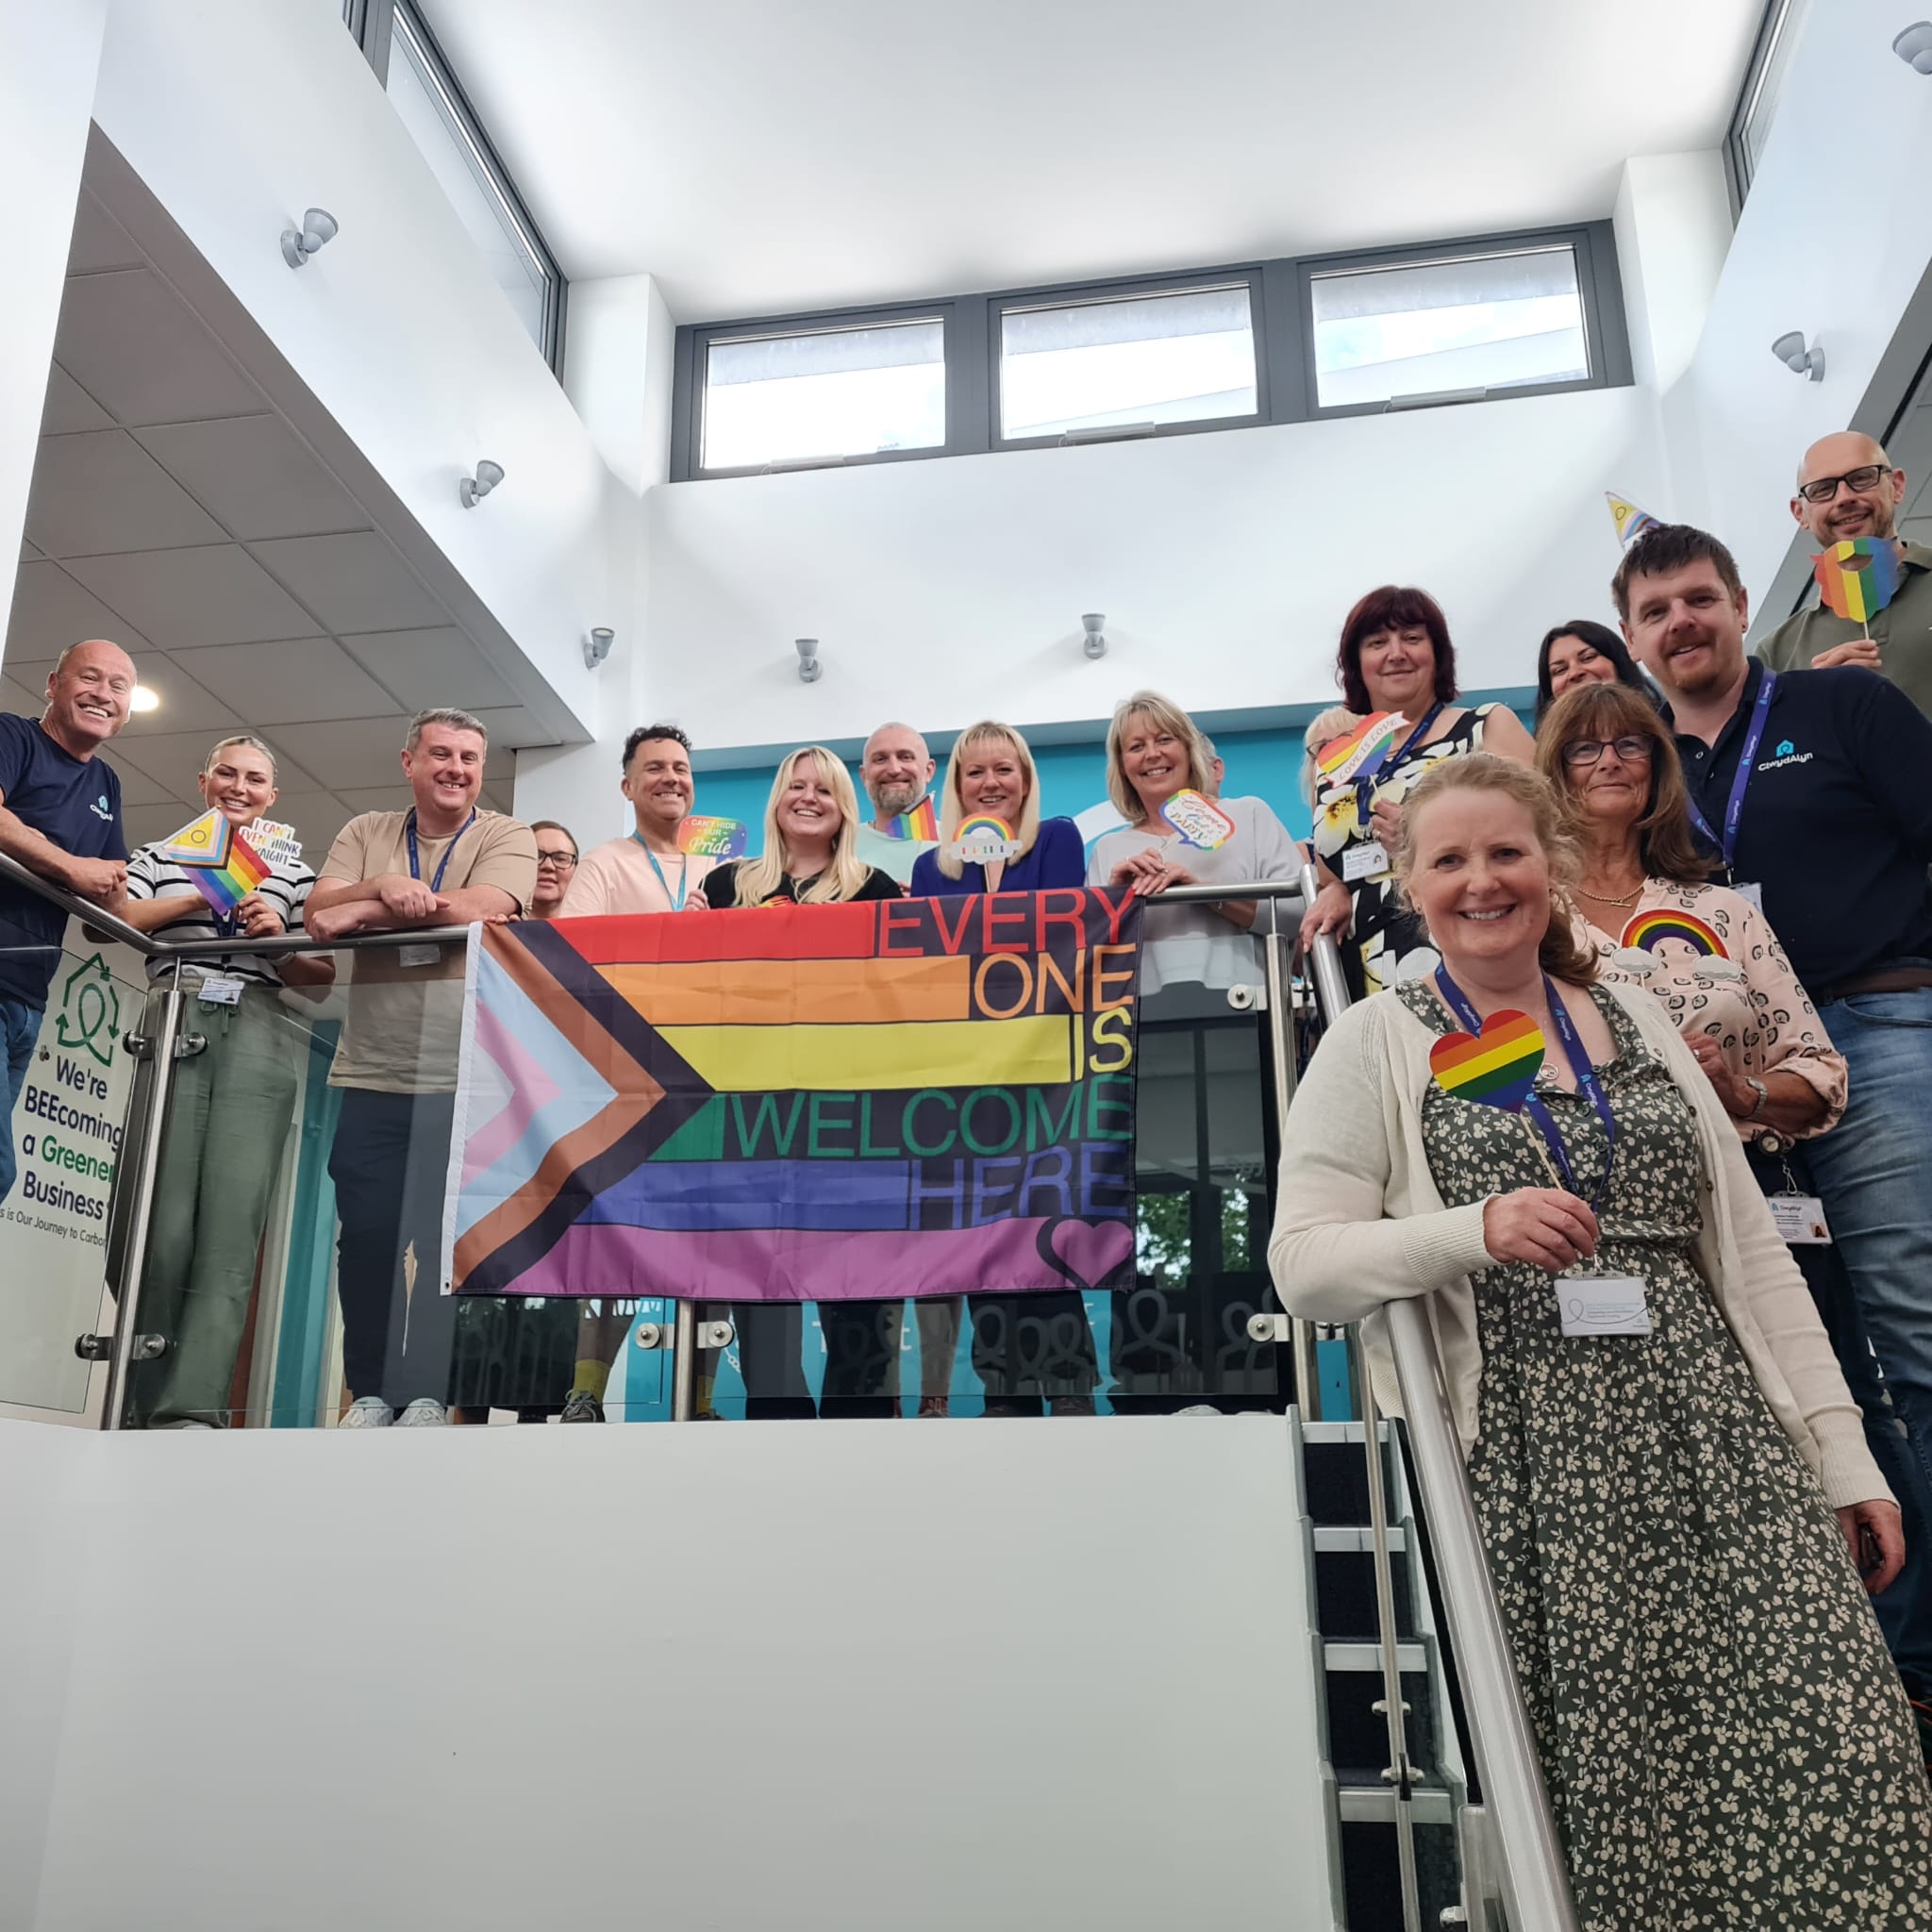 ClwydAlyn Housing Association&#8217;s Chairperson speaks out on the importance of supporting LGBTQ+ communities